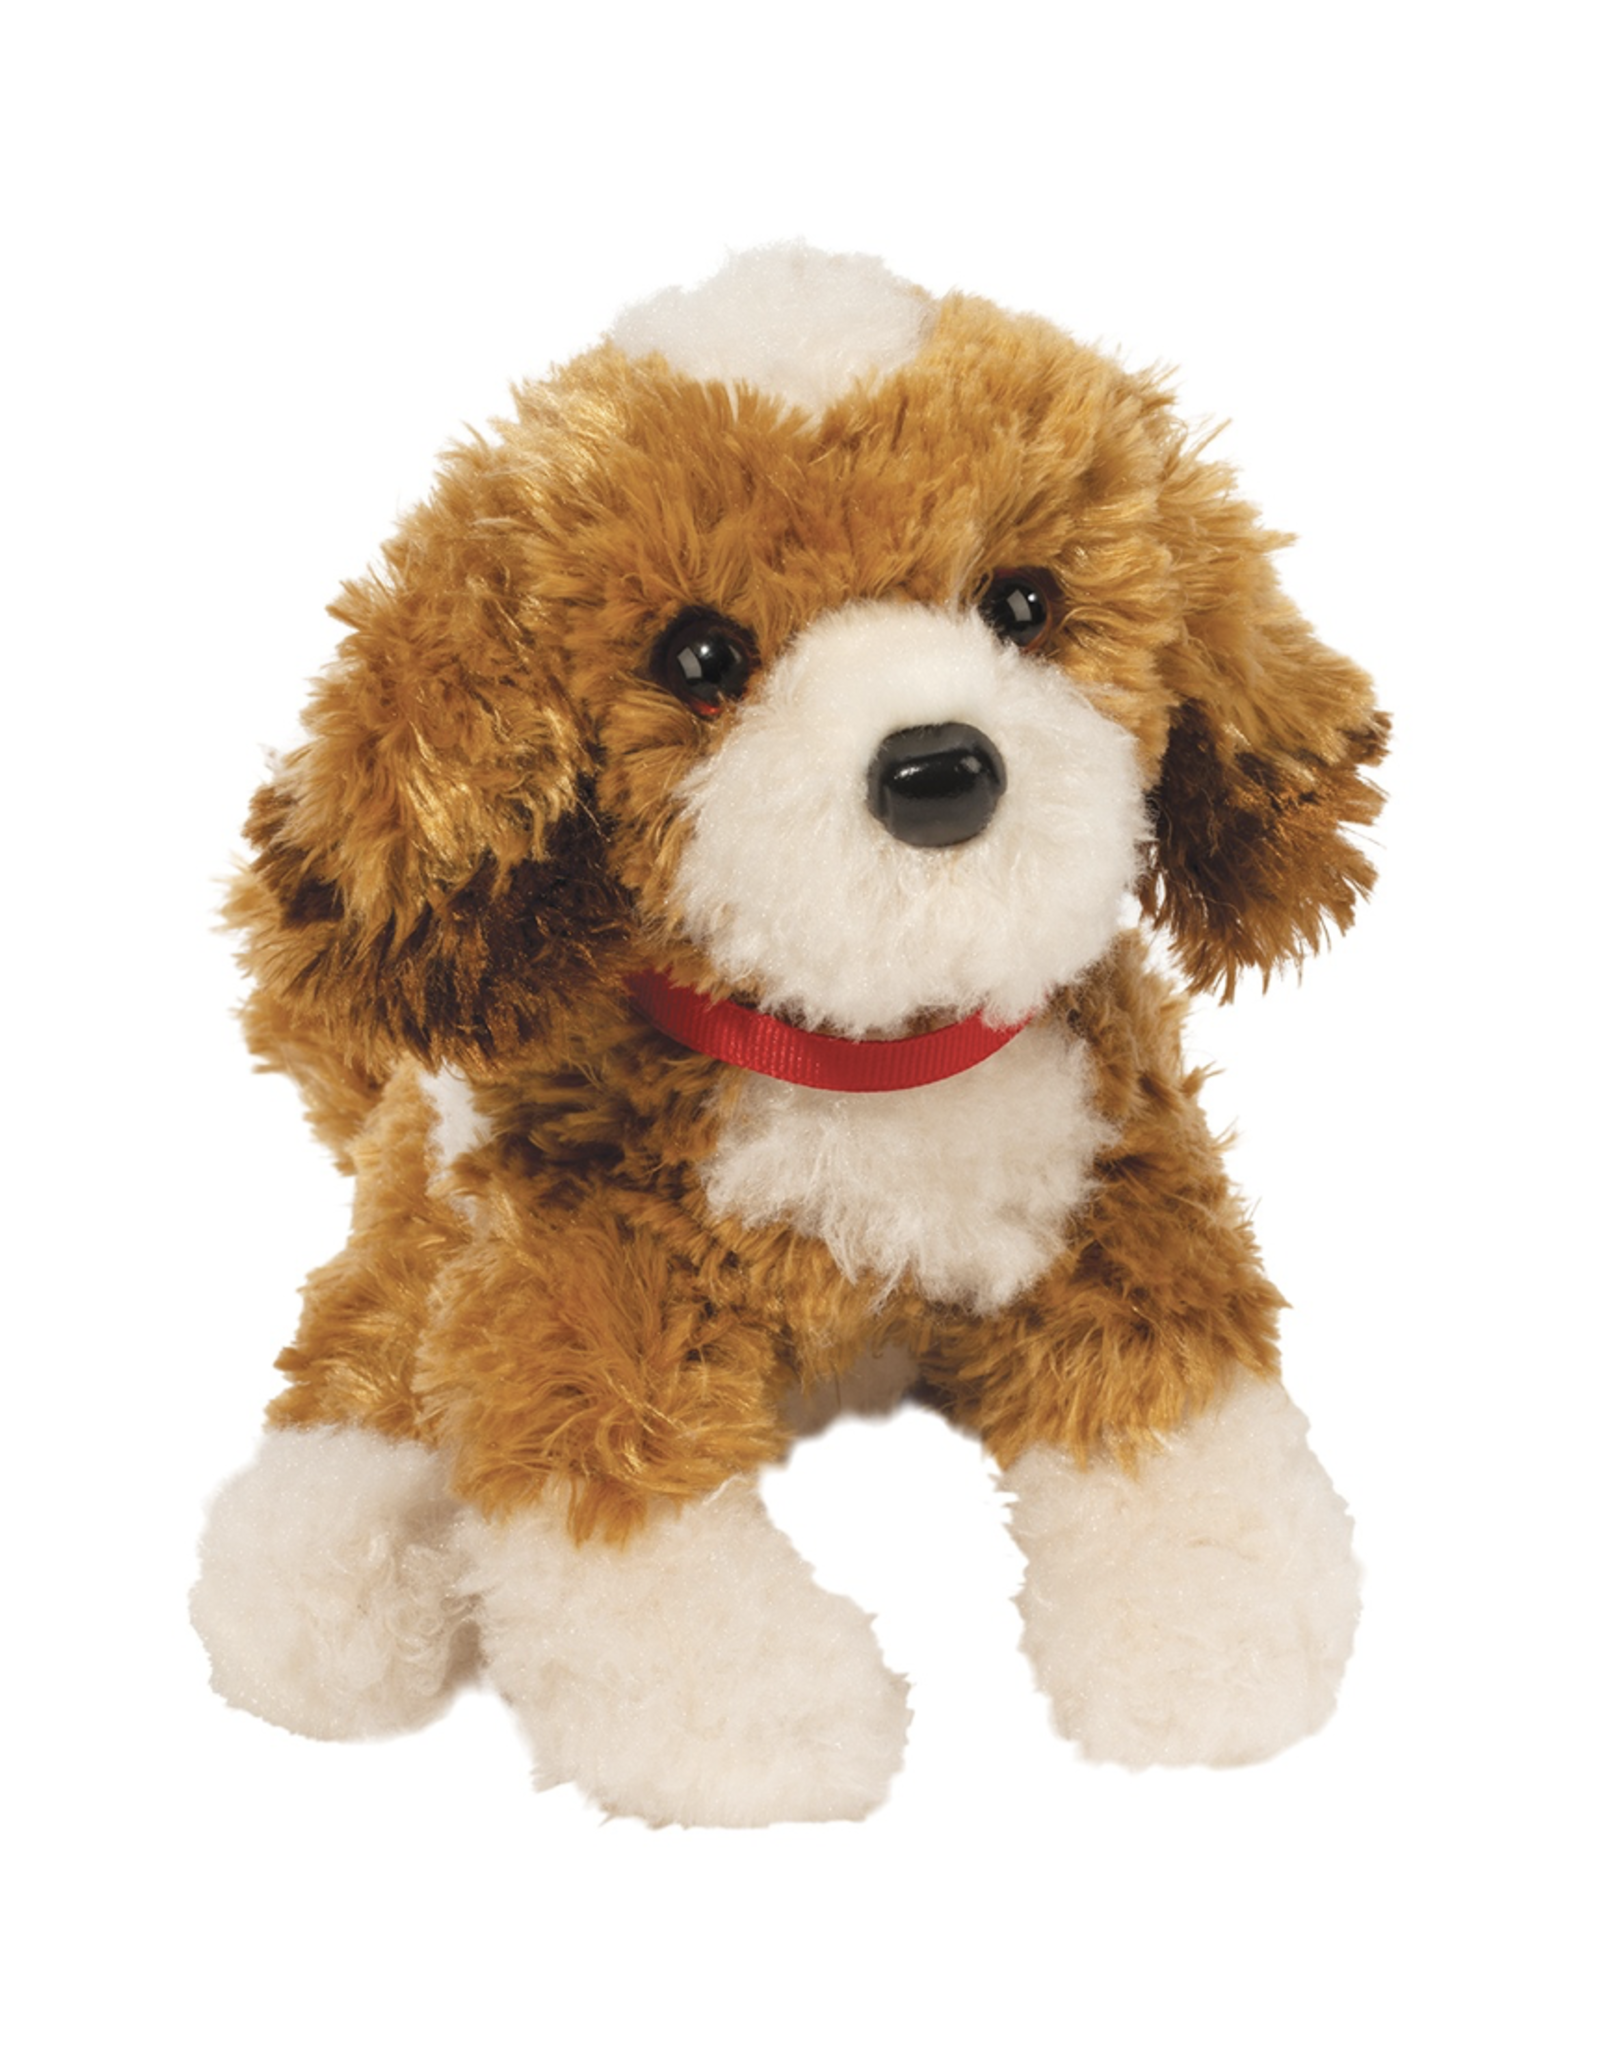 Buttercup Doodle Mix Pup Stuffed Animal - Cabin Creations